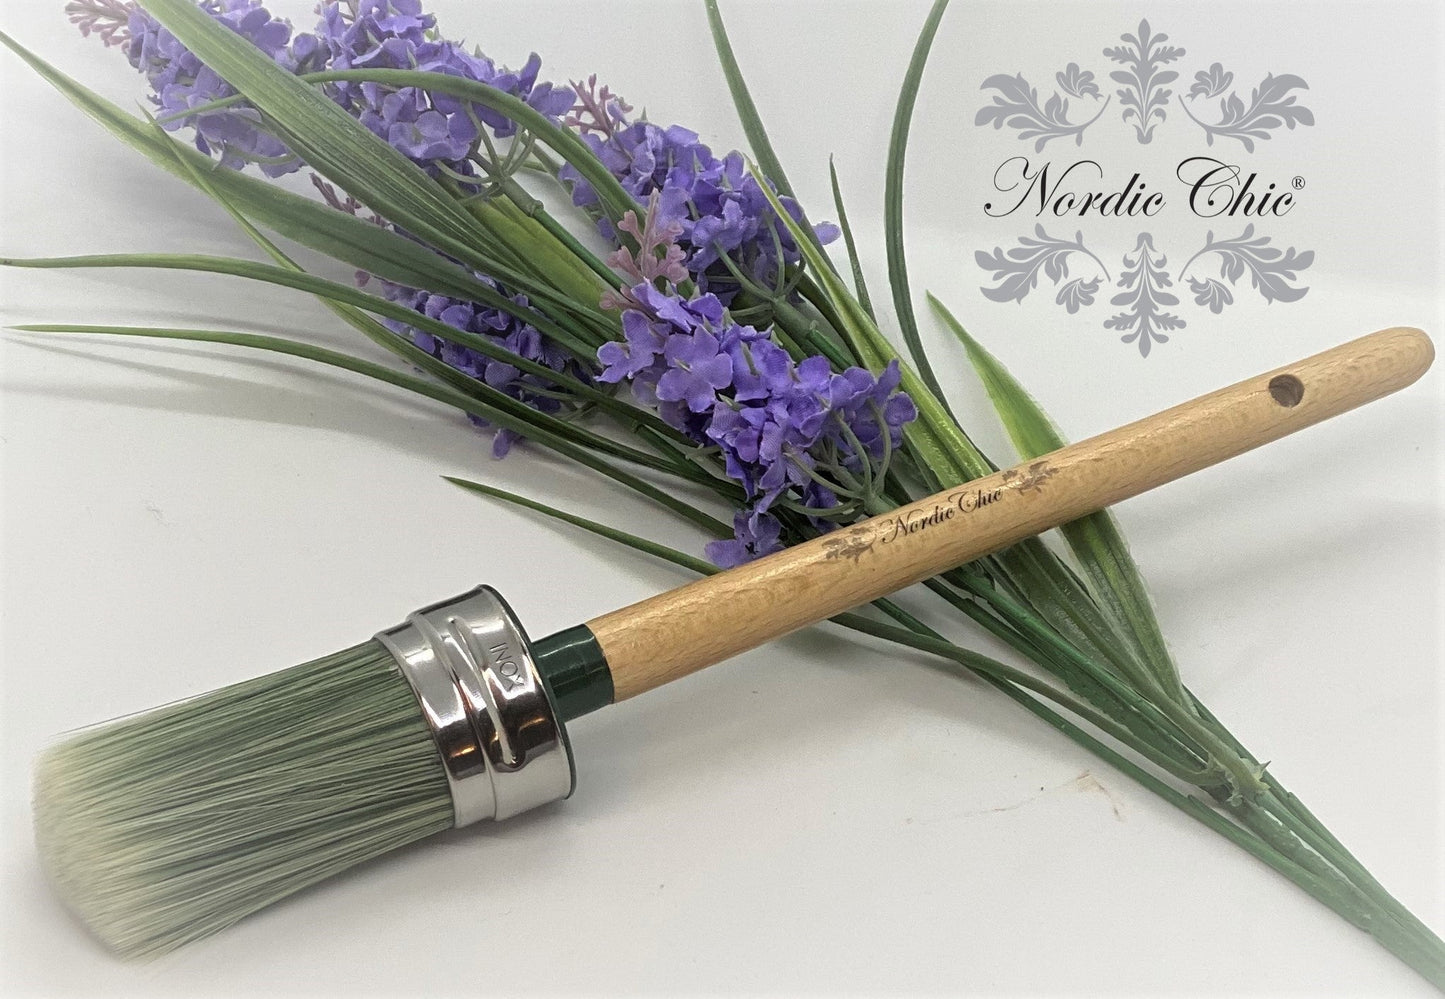 Nordic Chic Oval Paint Brush Size 35mm - Nordic Chic®